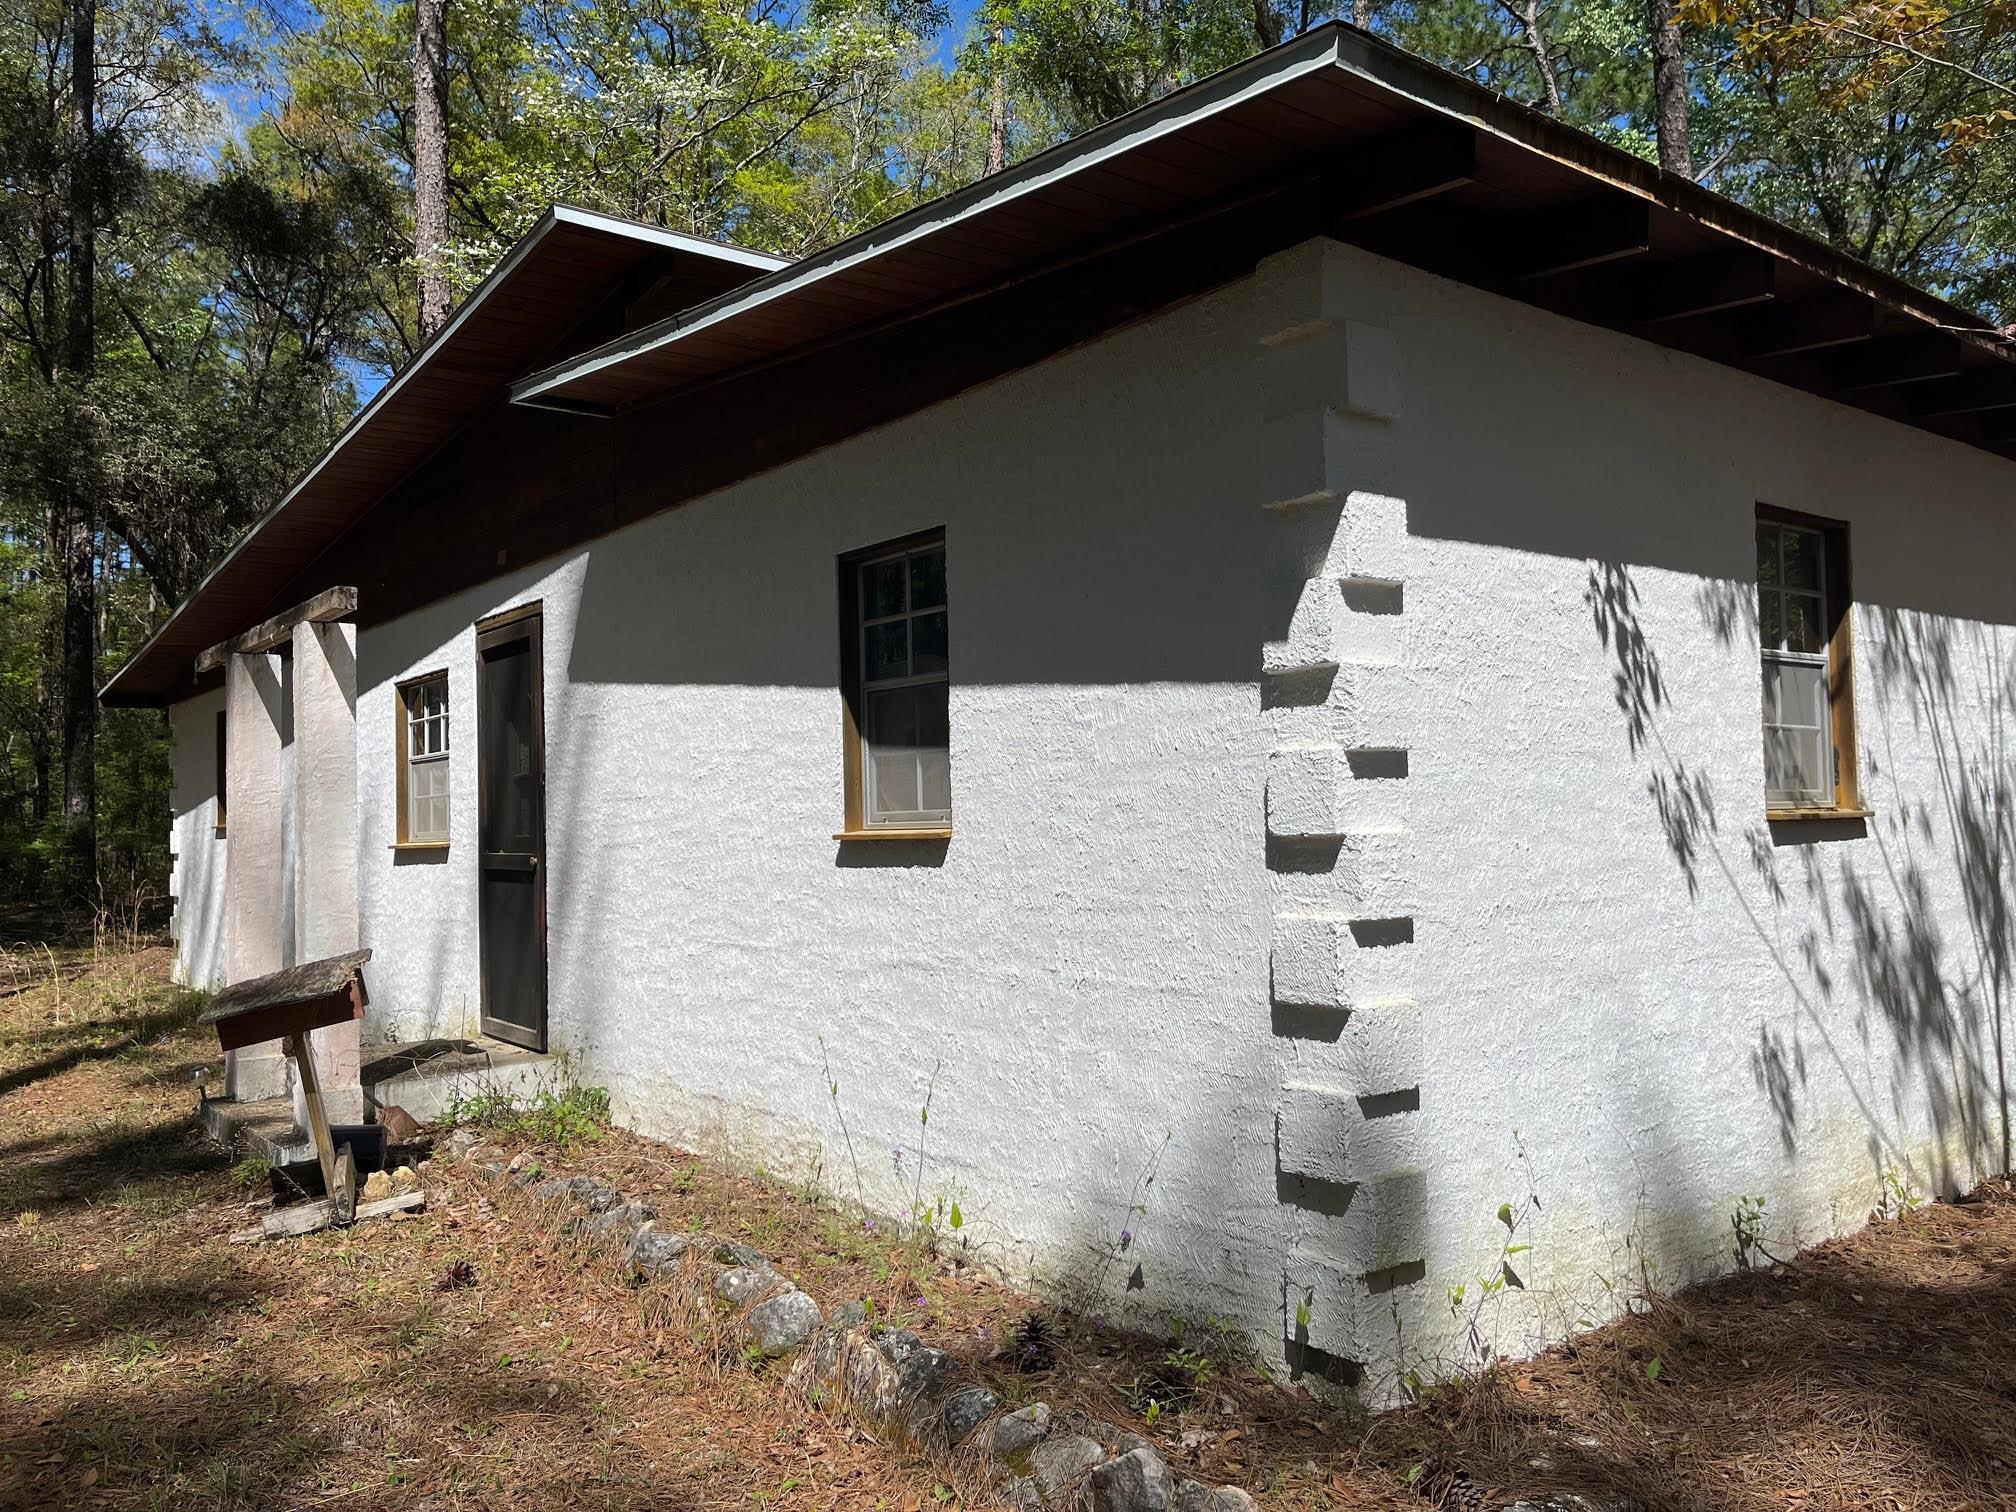 Property: 10720 Old Plank Rd,Tallahassee, FL